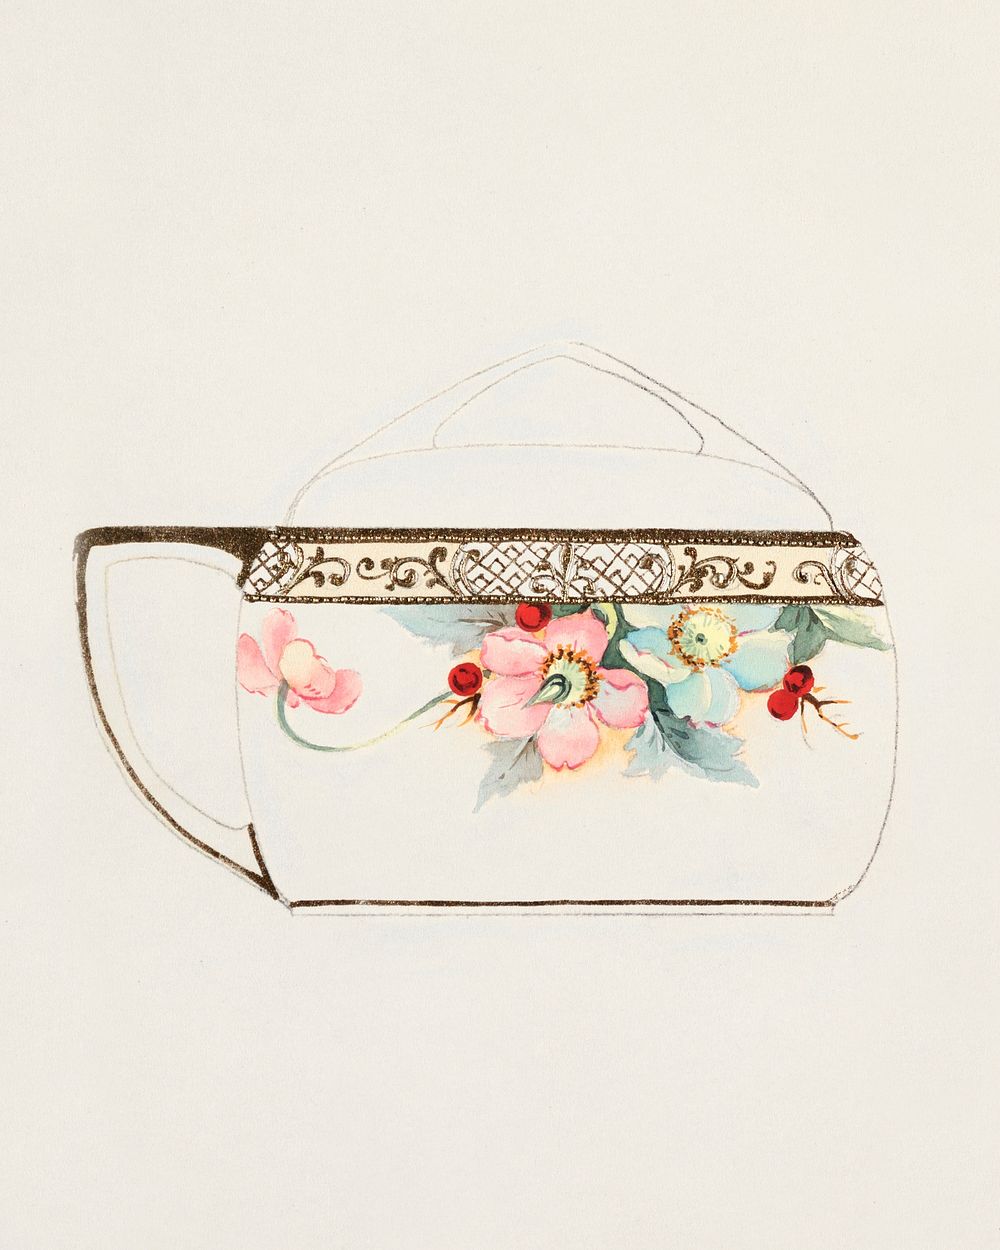 Design for a Teacup (1880-1910) painting in high resolution by Noritake Factory. Original from The Smithsonian Institution.…